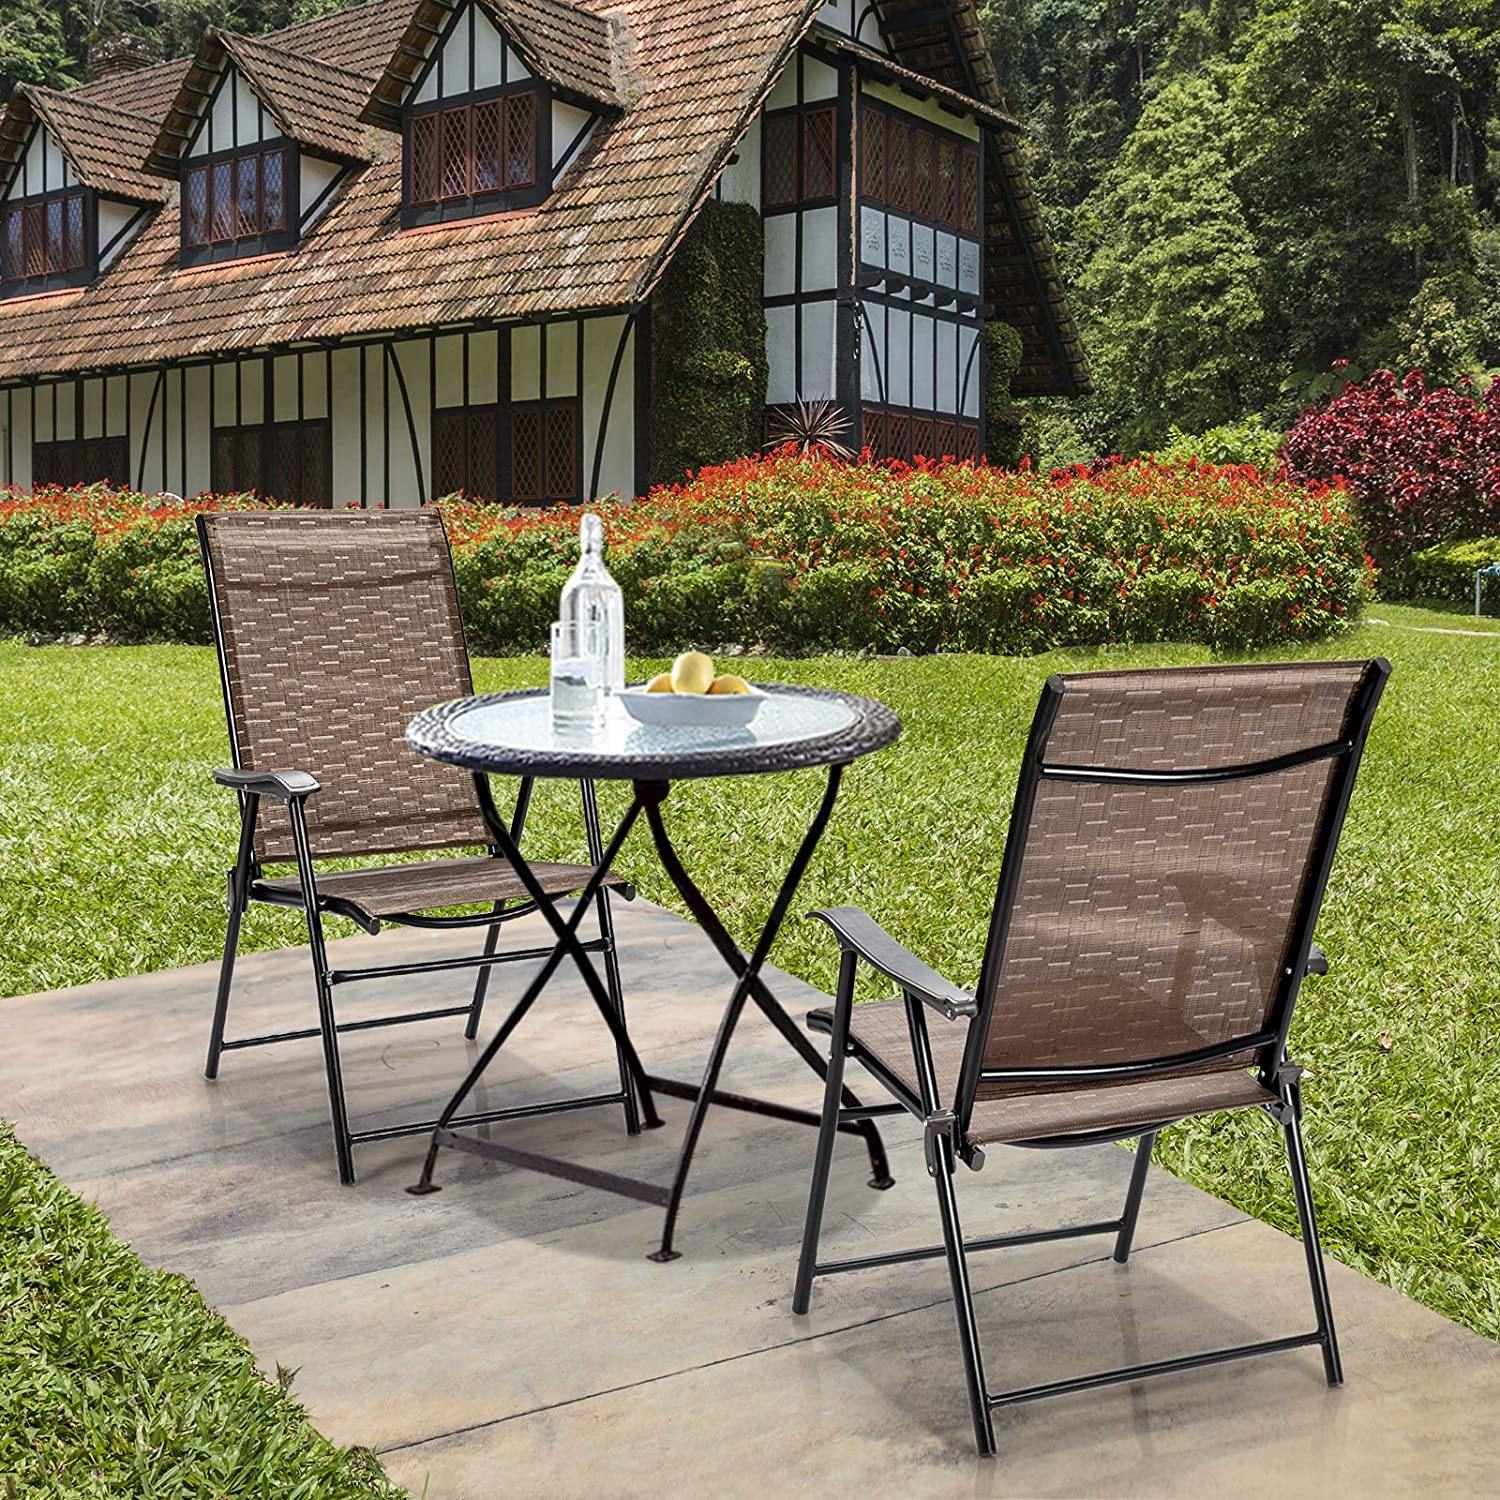 2-Pack Patio Dining Chairs, Portable Folding Chairs - Giantexus